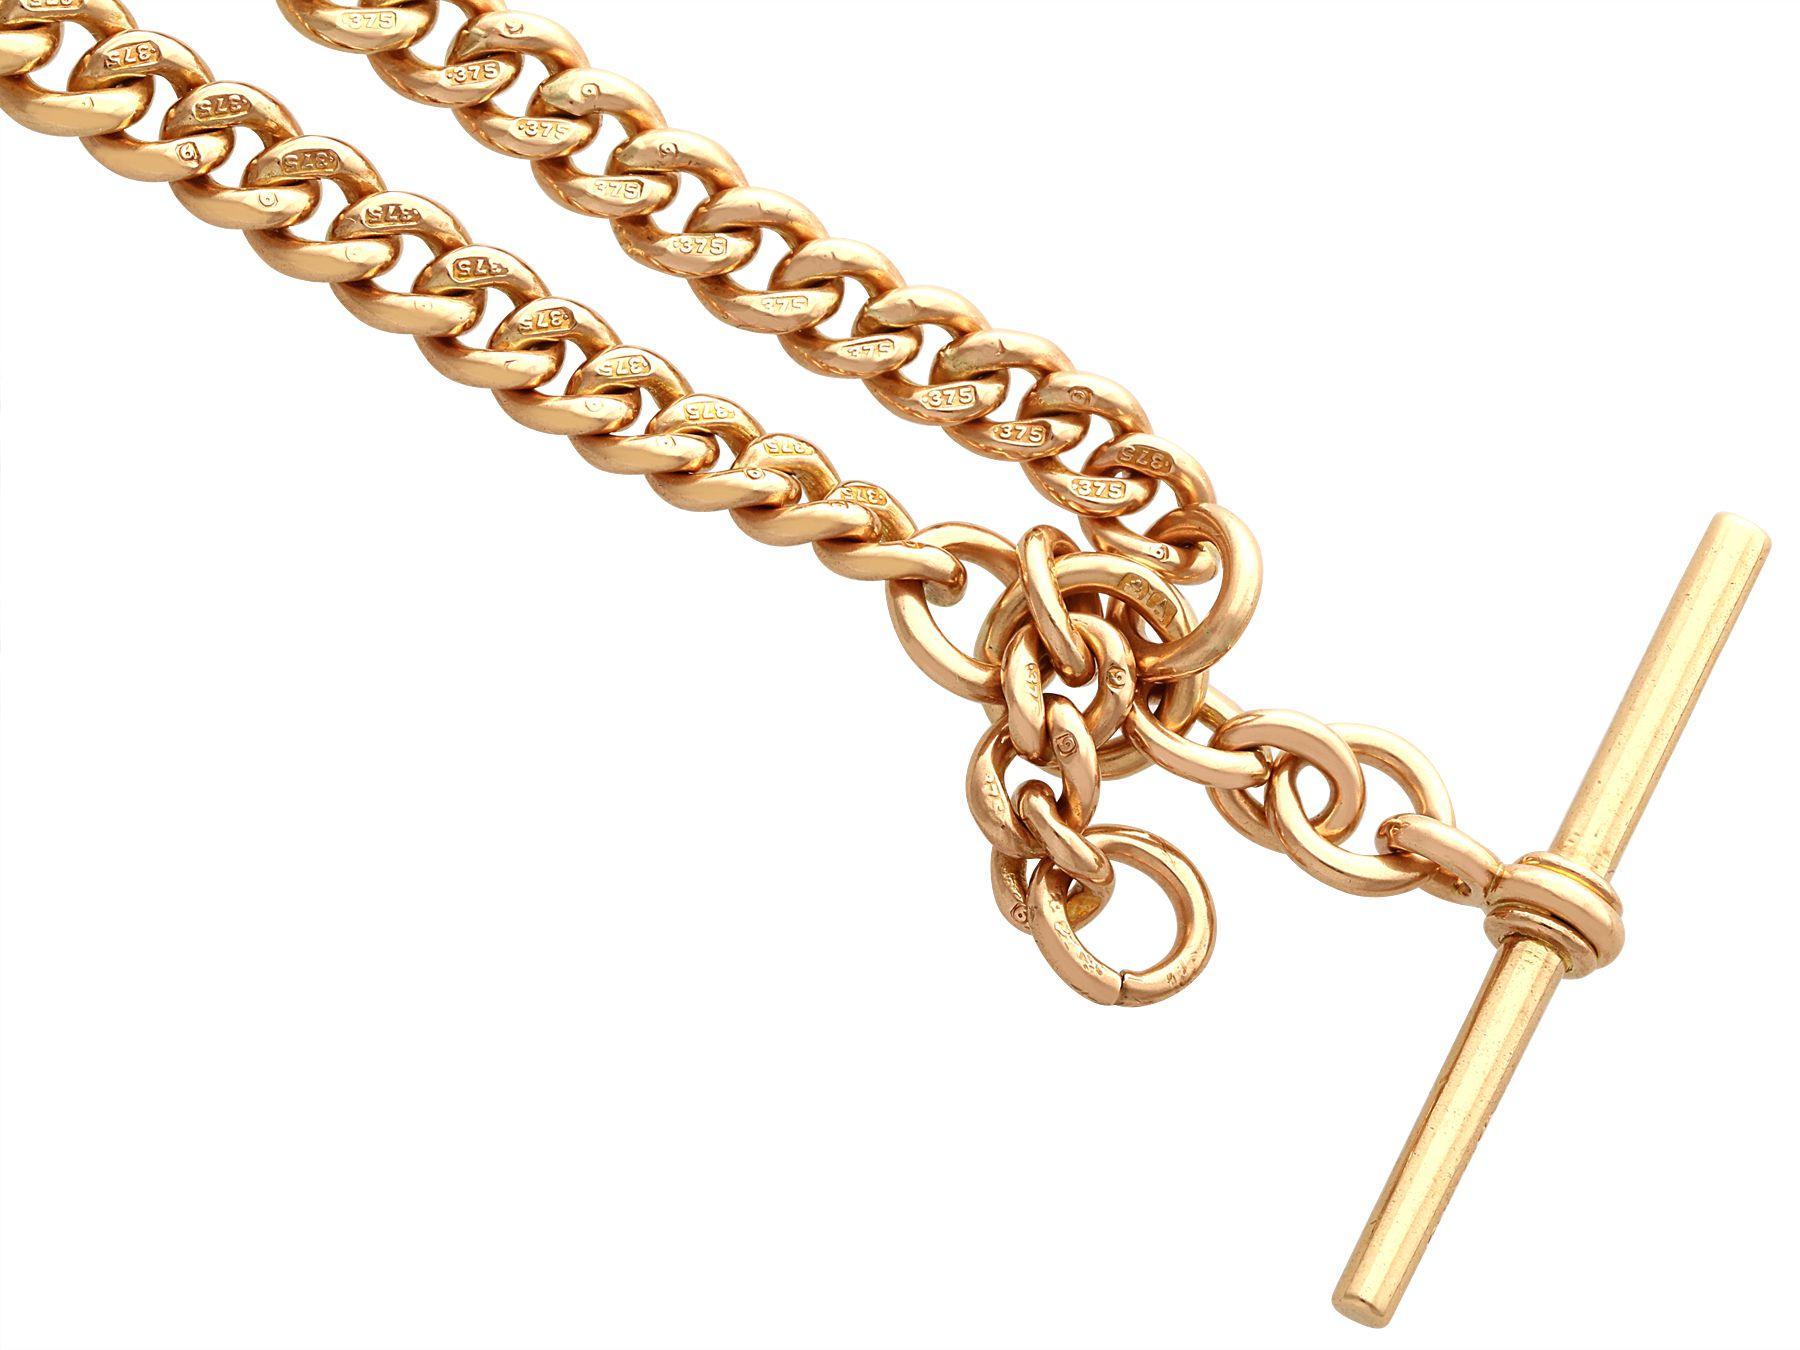 An exceptional, fine and impressive antique 9 karat yellow gold double Albert watch chain; part of our antique jewelry and estate jewelry collections.

This exceptional, fine and impressive double Albert watch chain has been crafted in 9k yellow